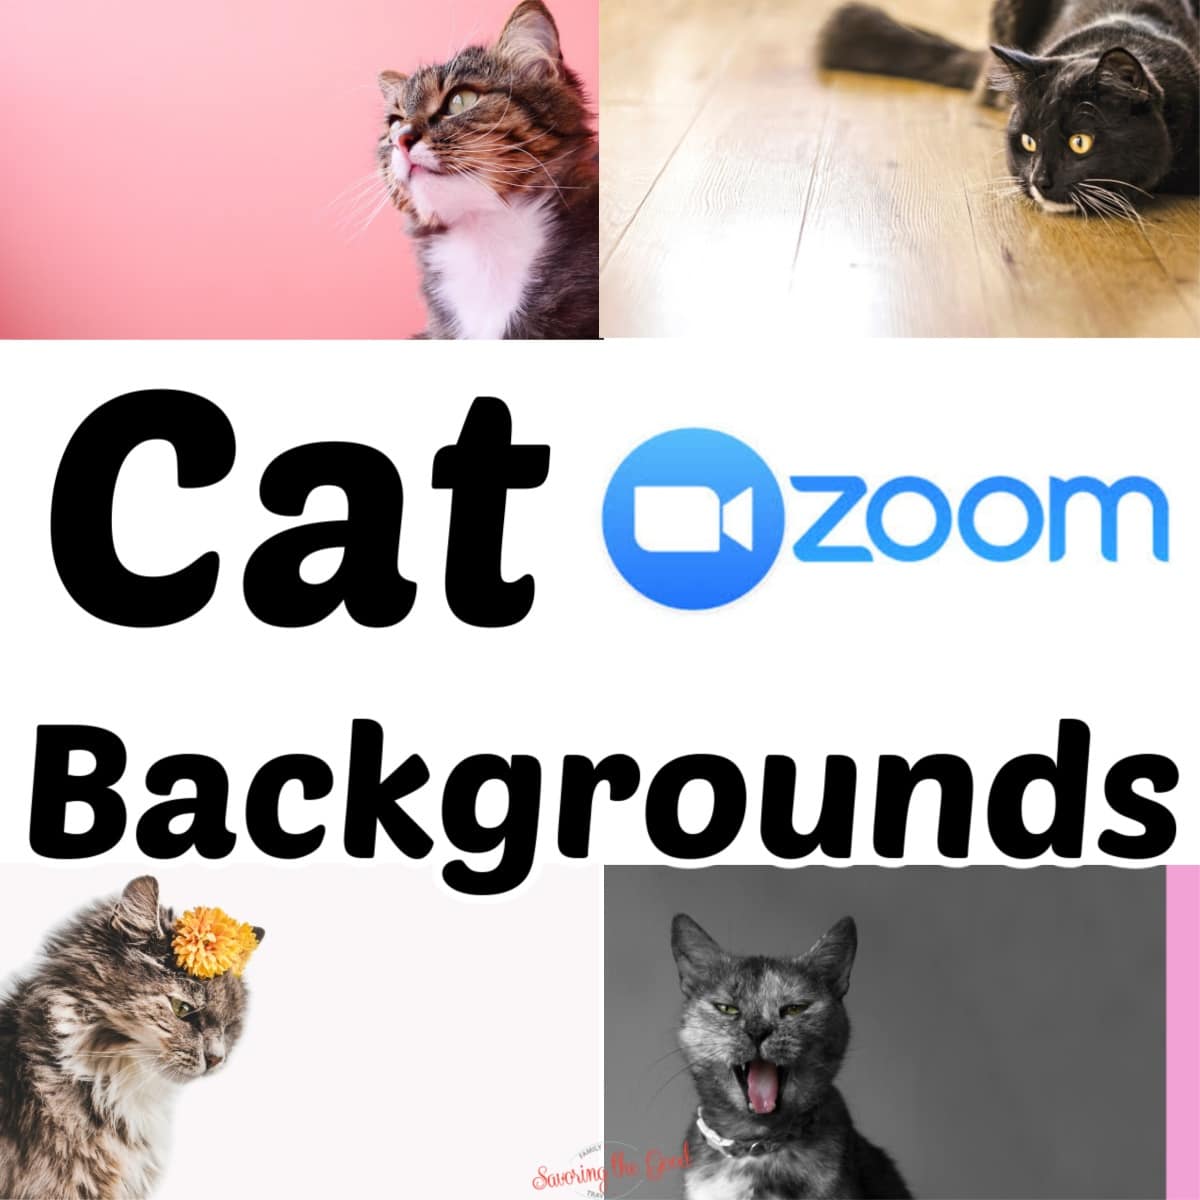 Cat Zoom Virtual Backgrounds image collage